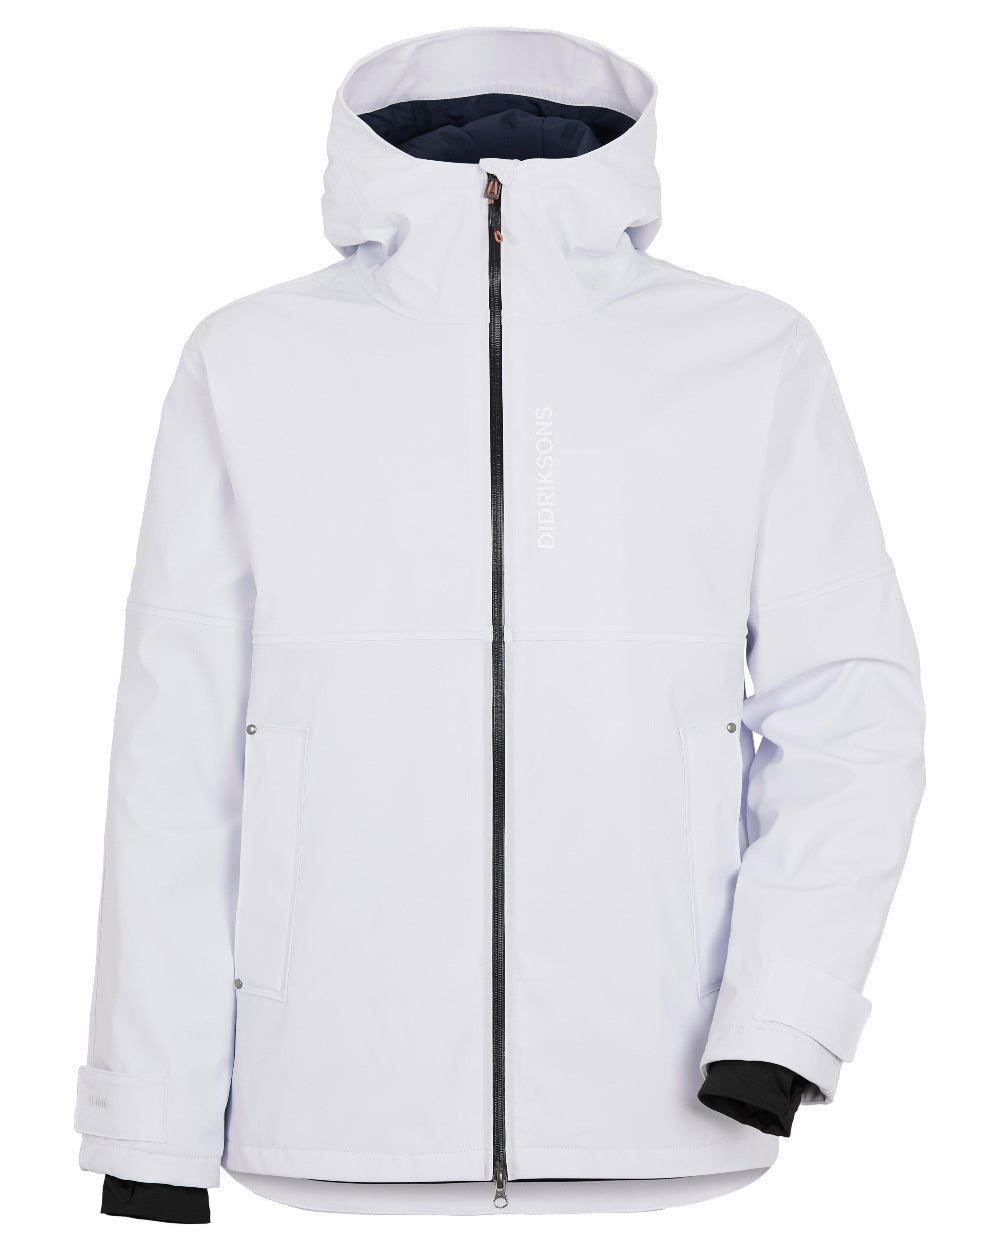 Snow white Coloured Didriksons Orust Jacket On A White Background 